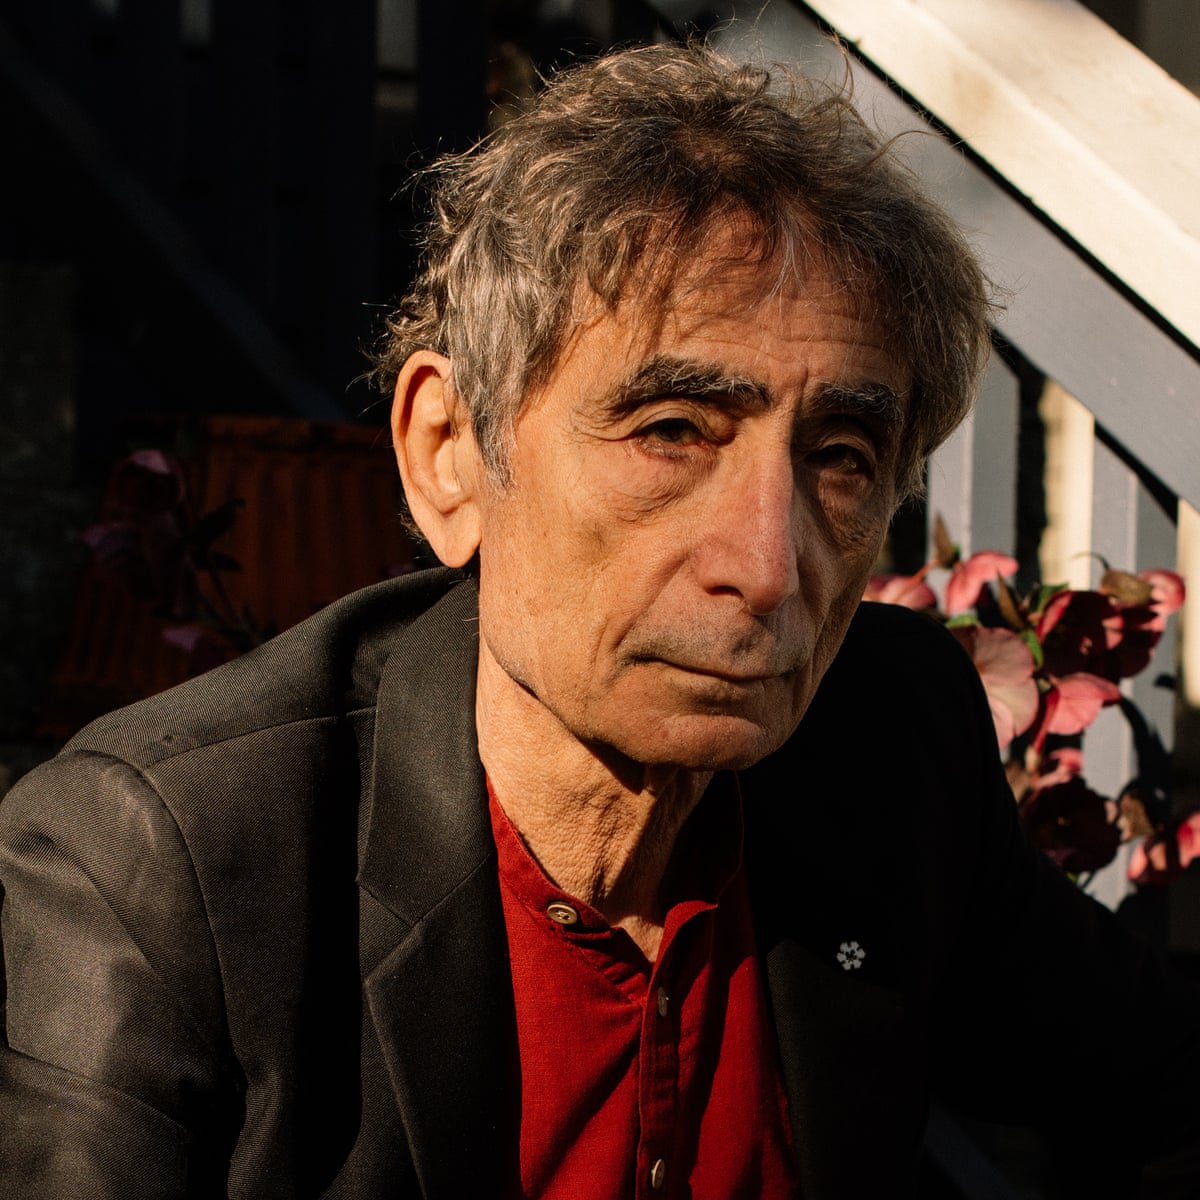 Fruitig Van toepassing Uiterlijk The trauma doctor: Gabor Maté on happiness, hope and how to heal our  deepest wounds | Health & wellbeing | The Guardian